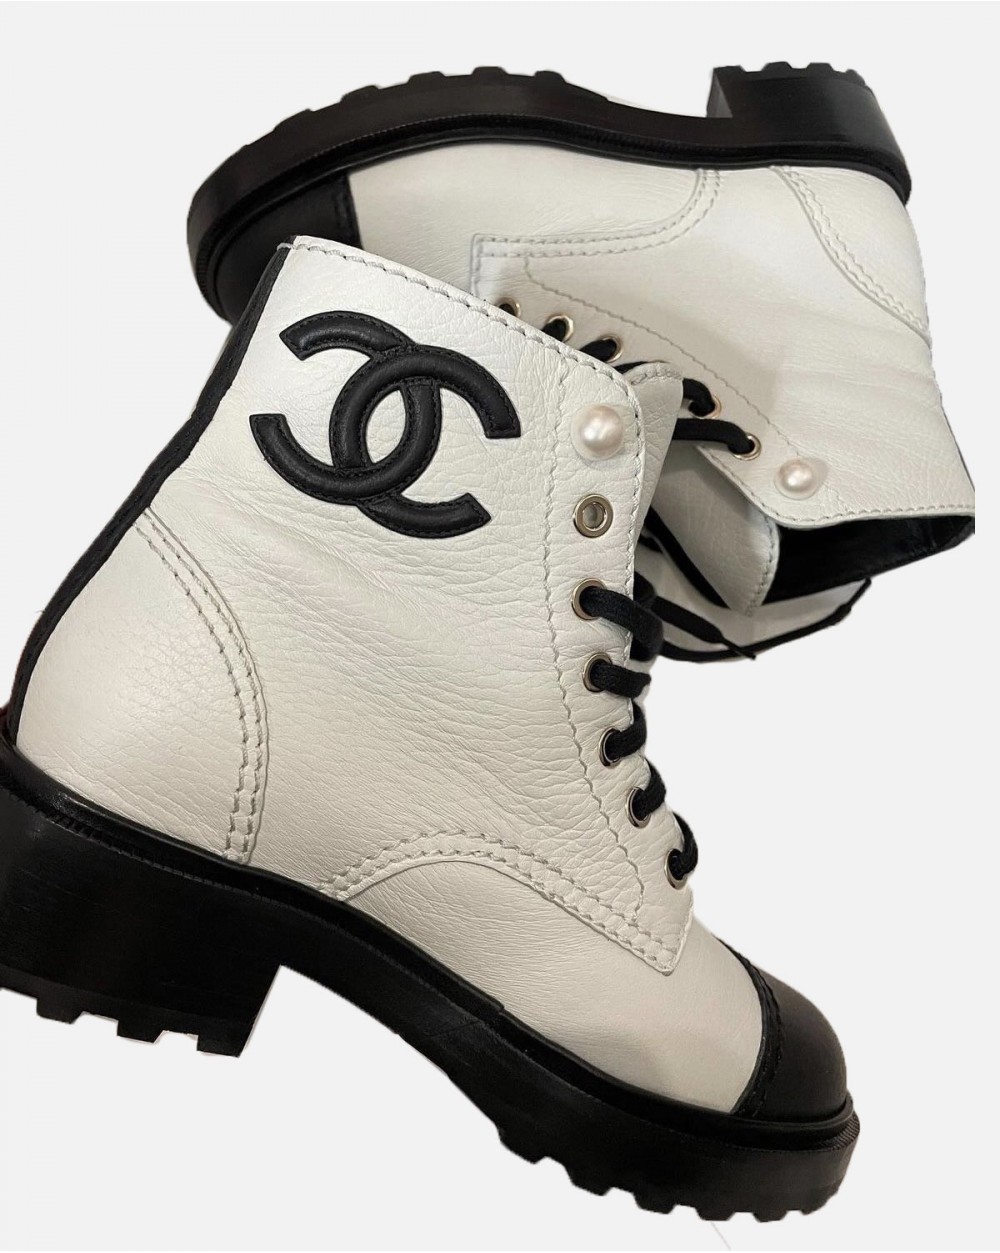 Chanel Black And White Ankle Boots Netherlands SAVE 45  pivphuketcom